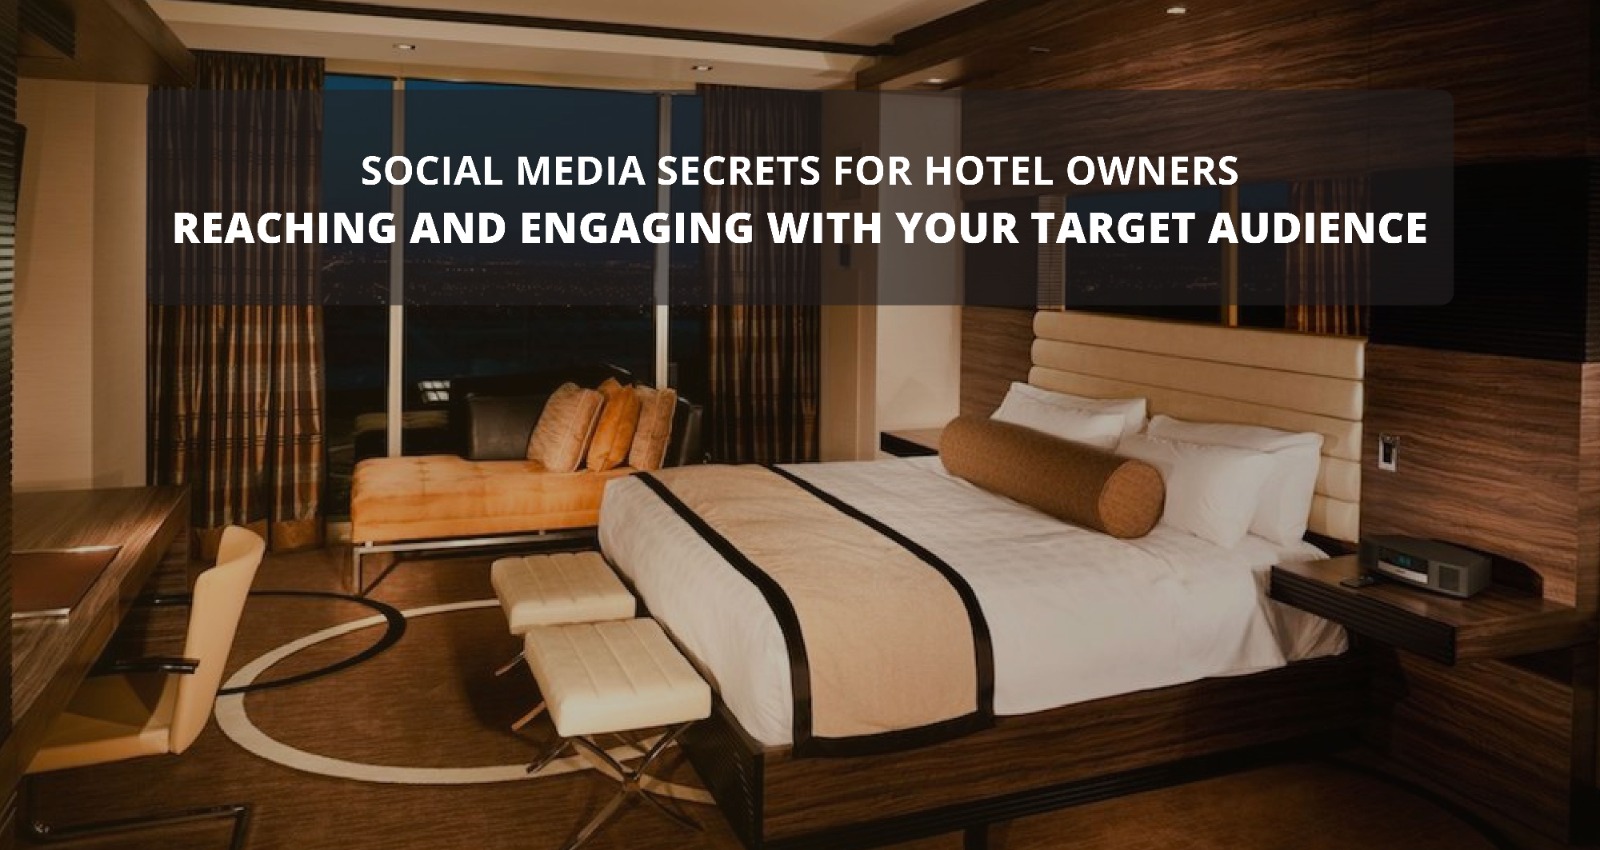 Social Media Secrets for Hotel Owners: Reaching and Engaging with Your Target Audience